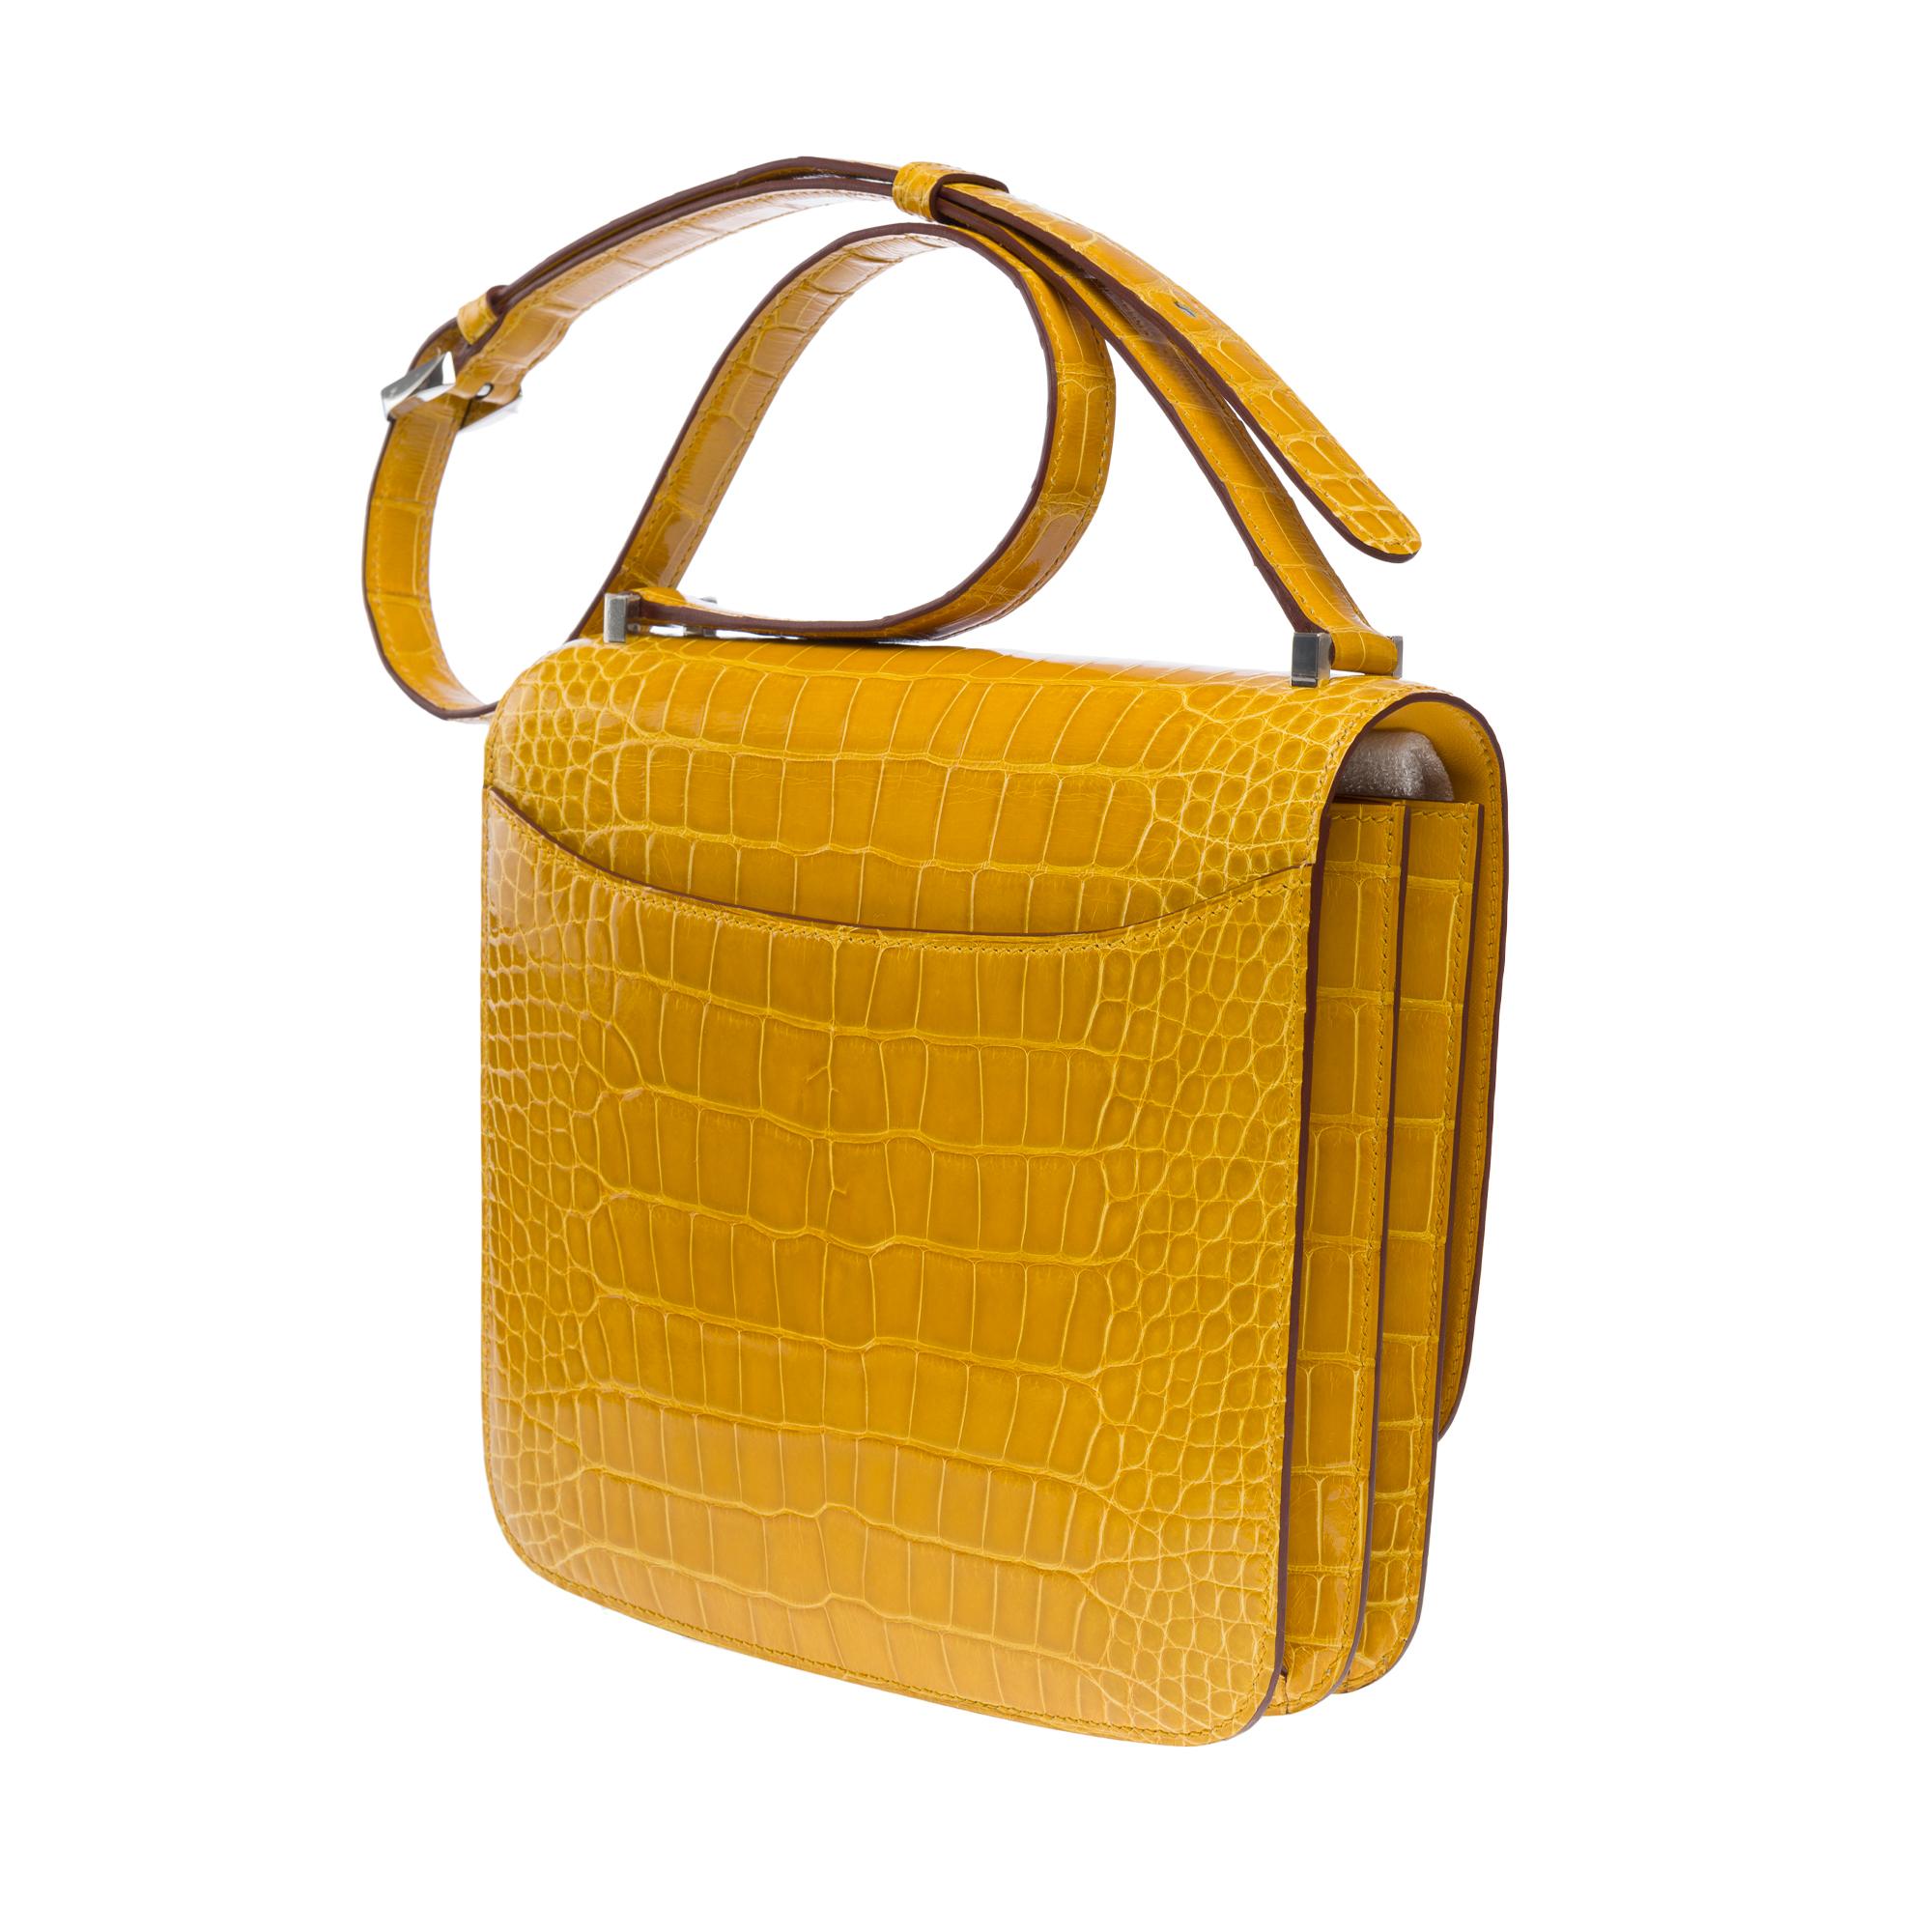 New Rare Hermes 2002 shoulder bag in Ambre Yellow Alligator leather, SHW For Sale 2